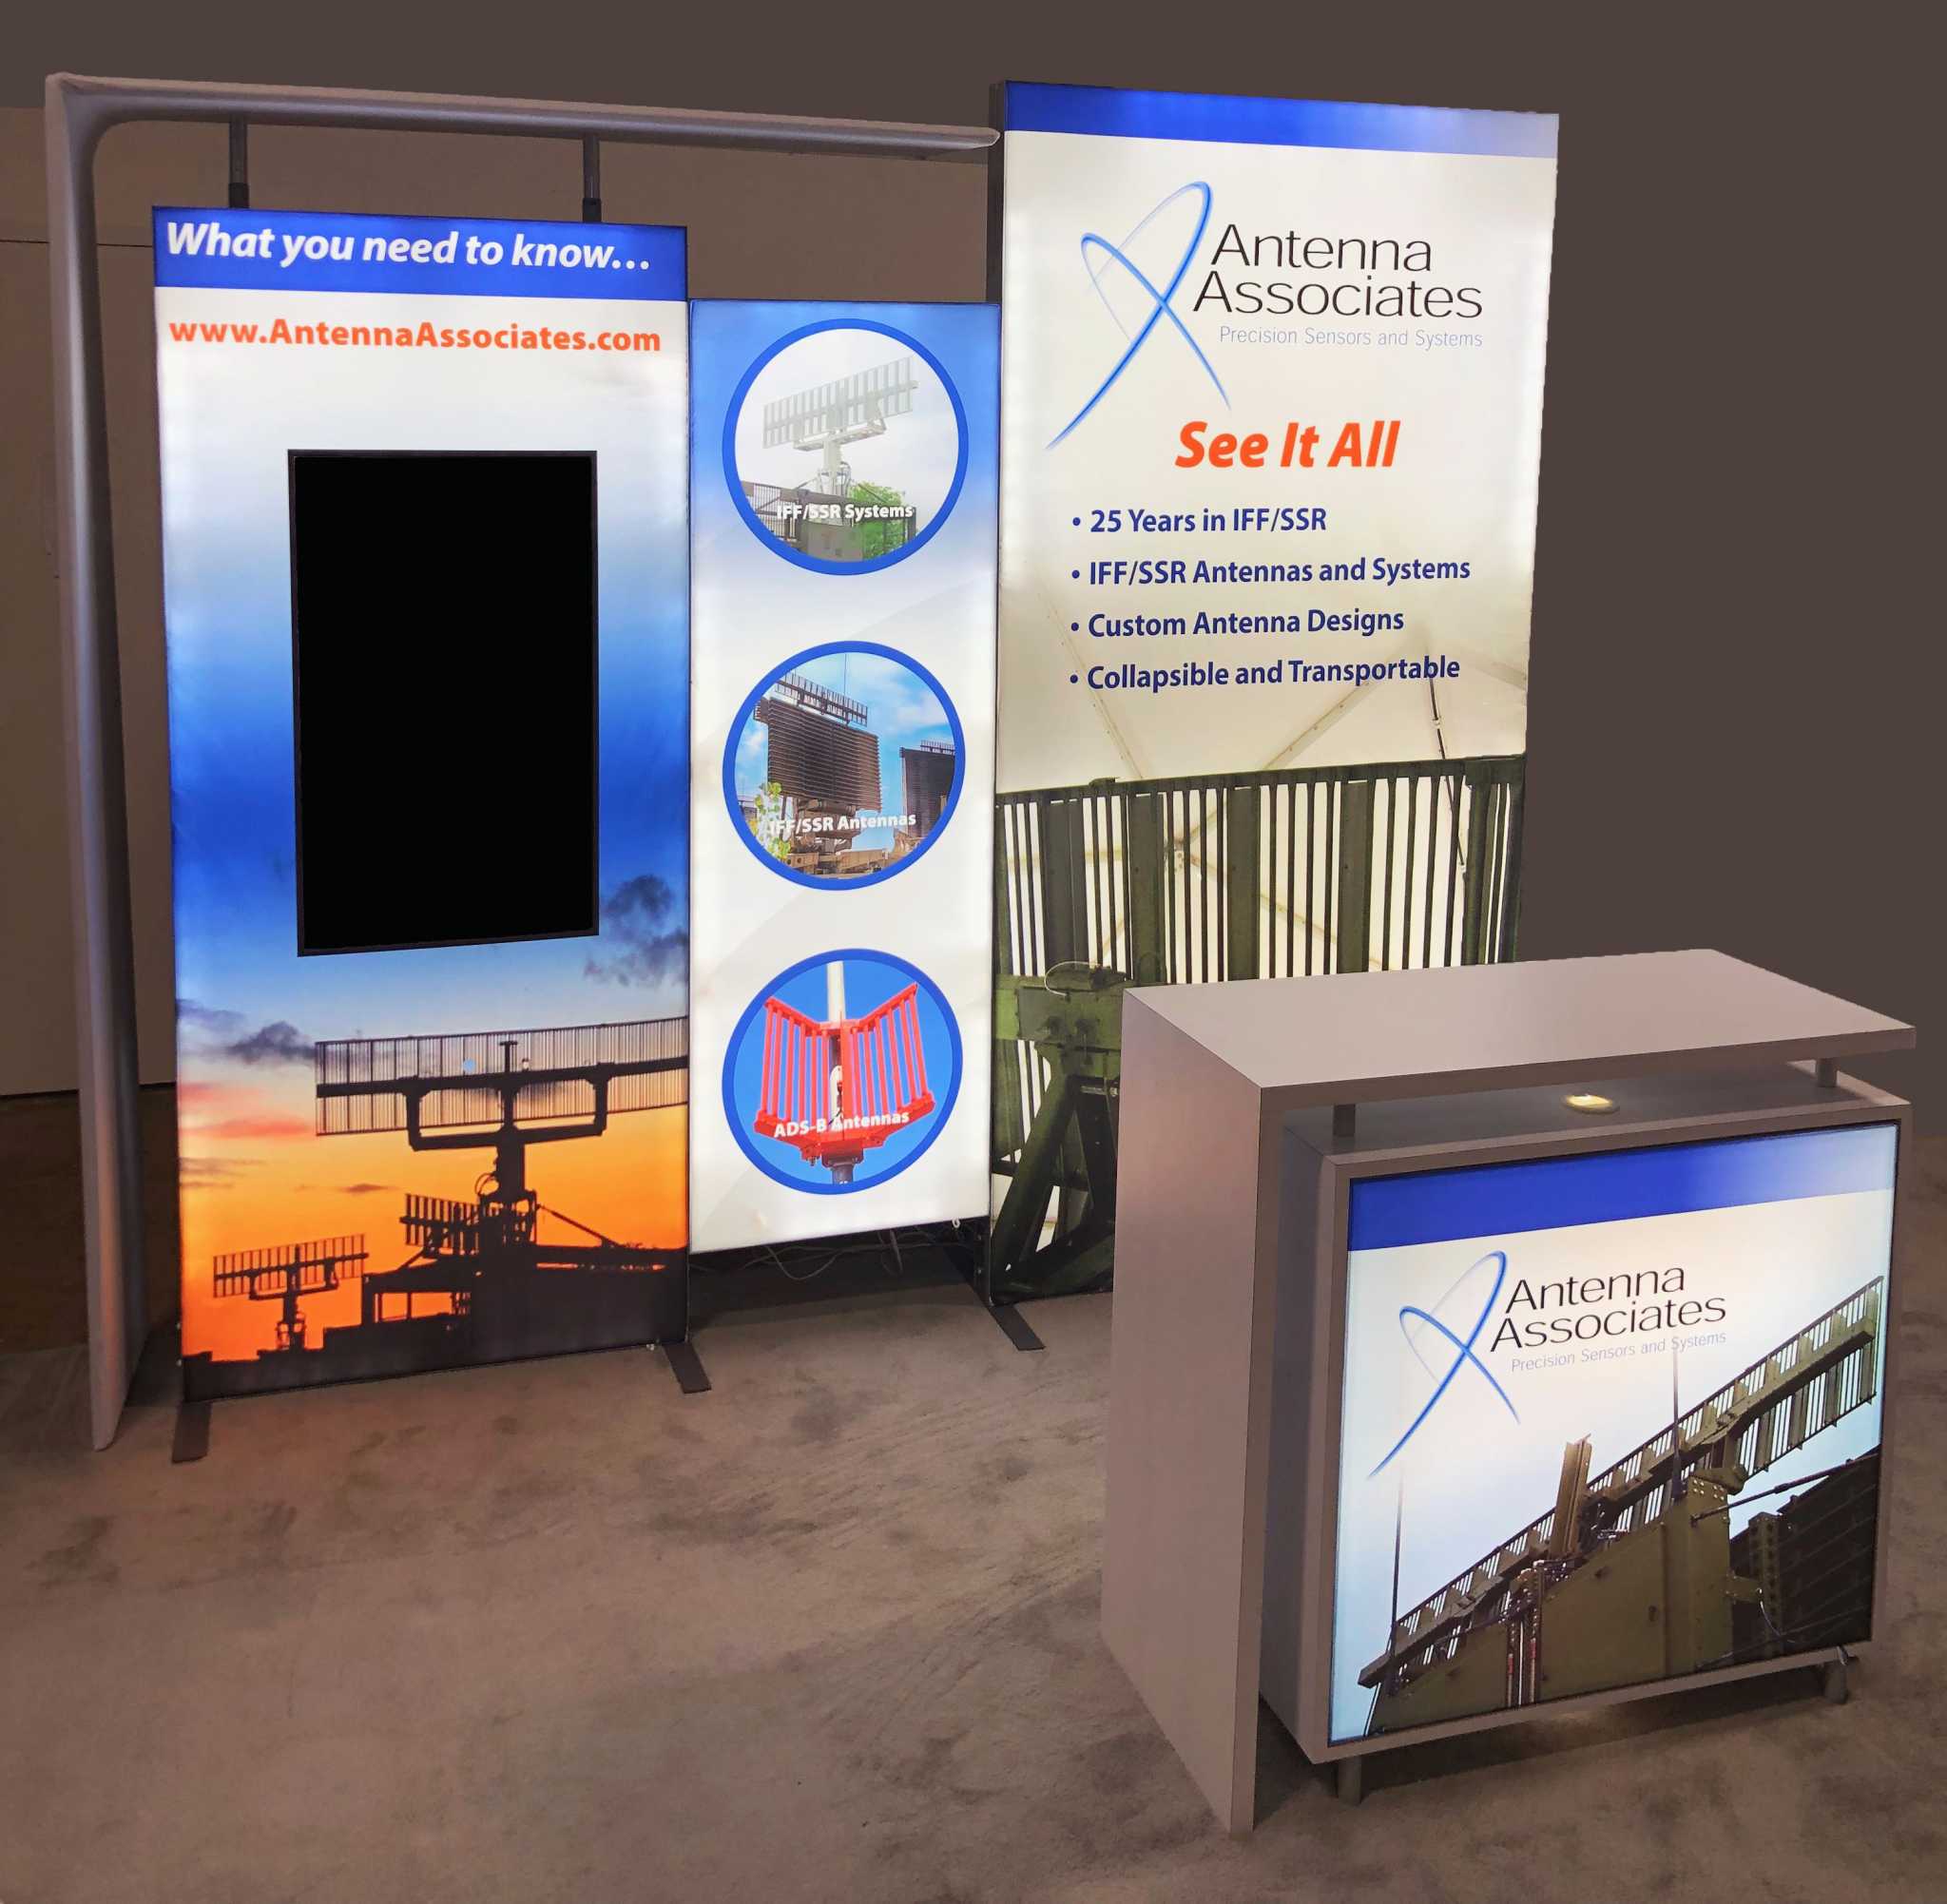 Custom modular LED backlit trade show display with vertically mounted monitor and branded backlit cabinet delivers vibrant graphics in a 10x10 booth space.